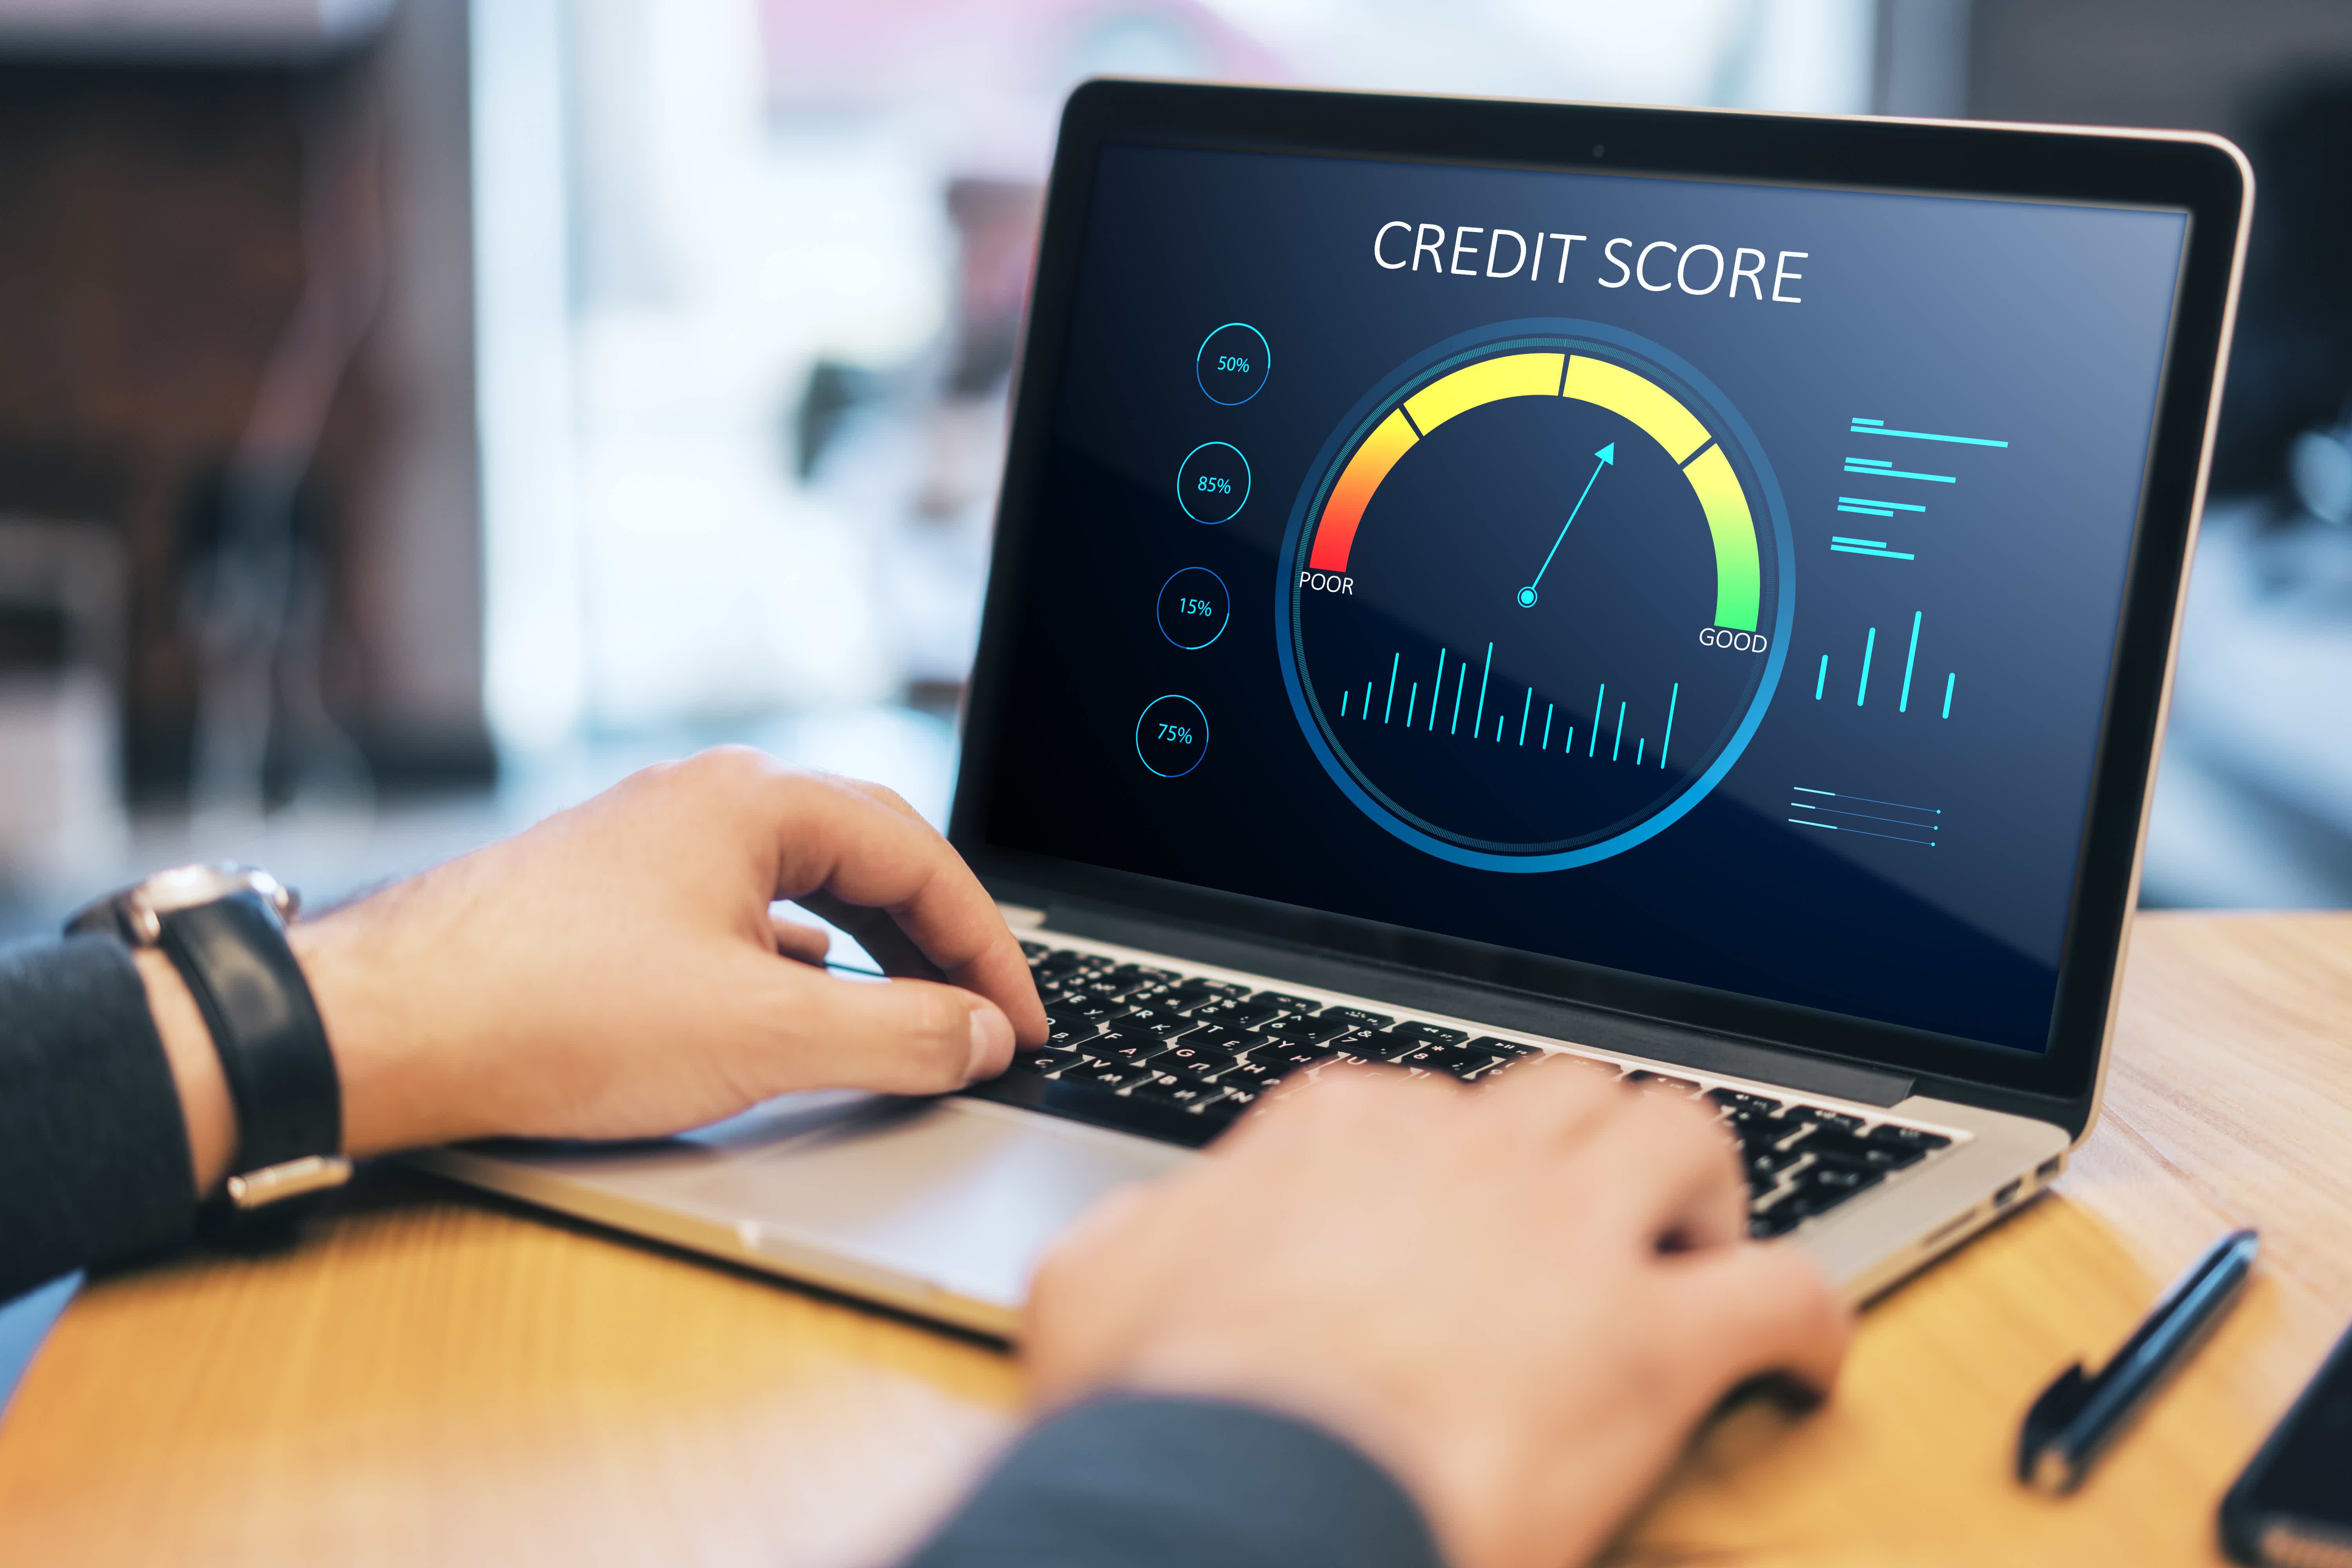 Check your credit score and learn about your finances. Source: Adobe Stock.